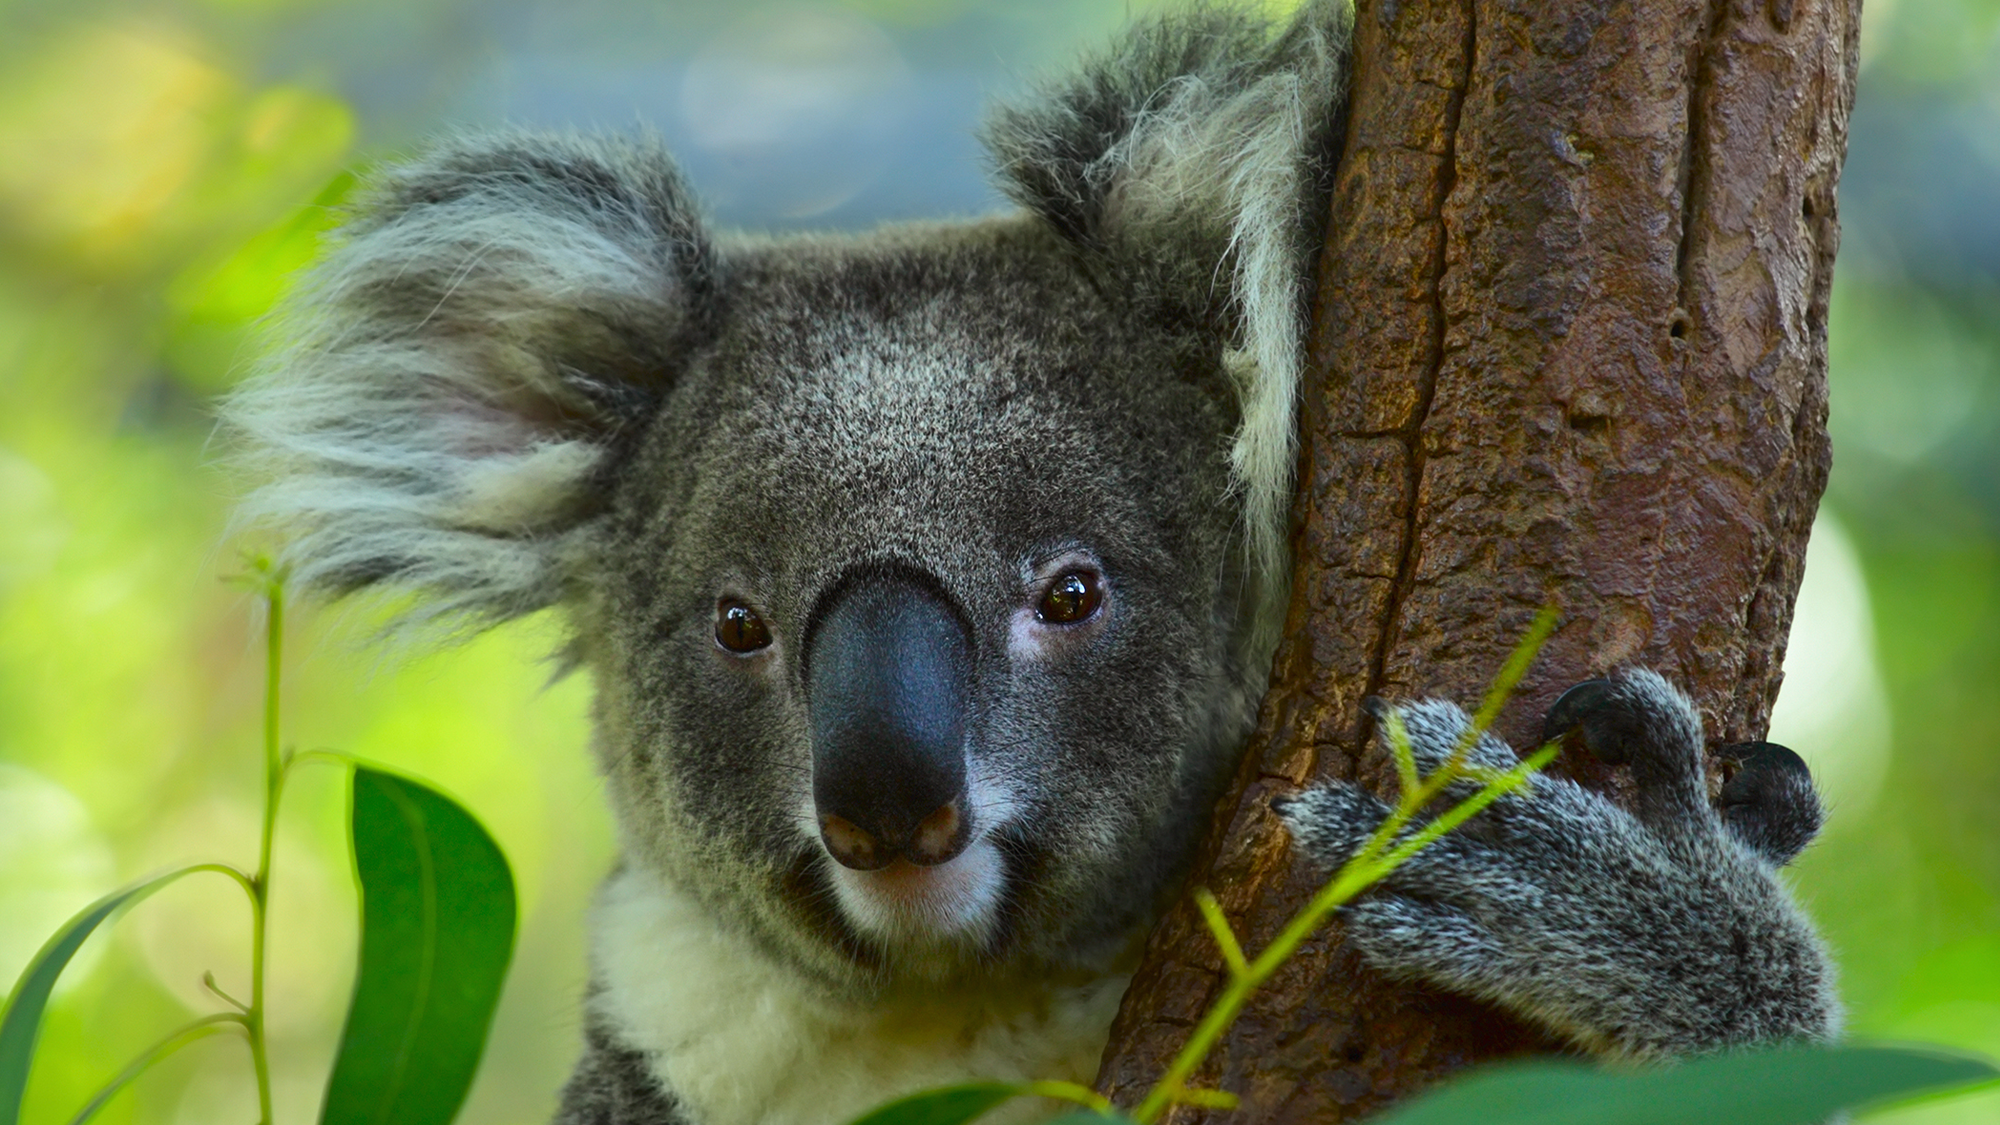 Wild koalas are getting vaccinated against chlamydia